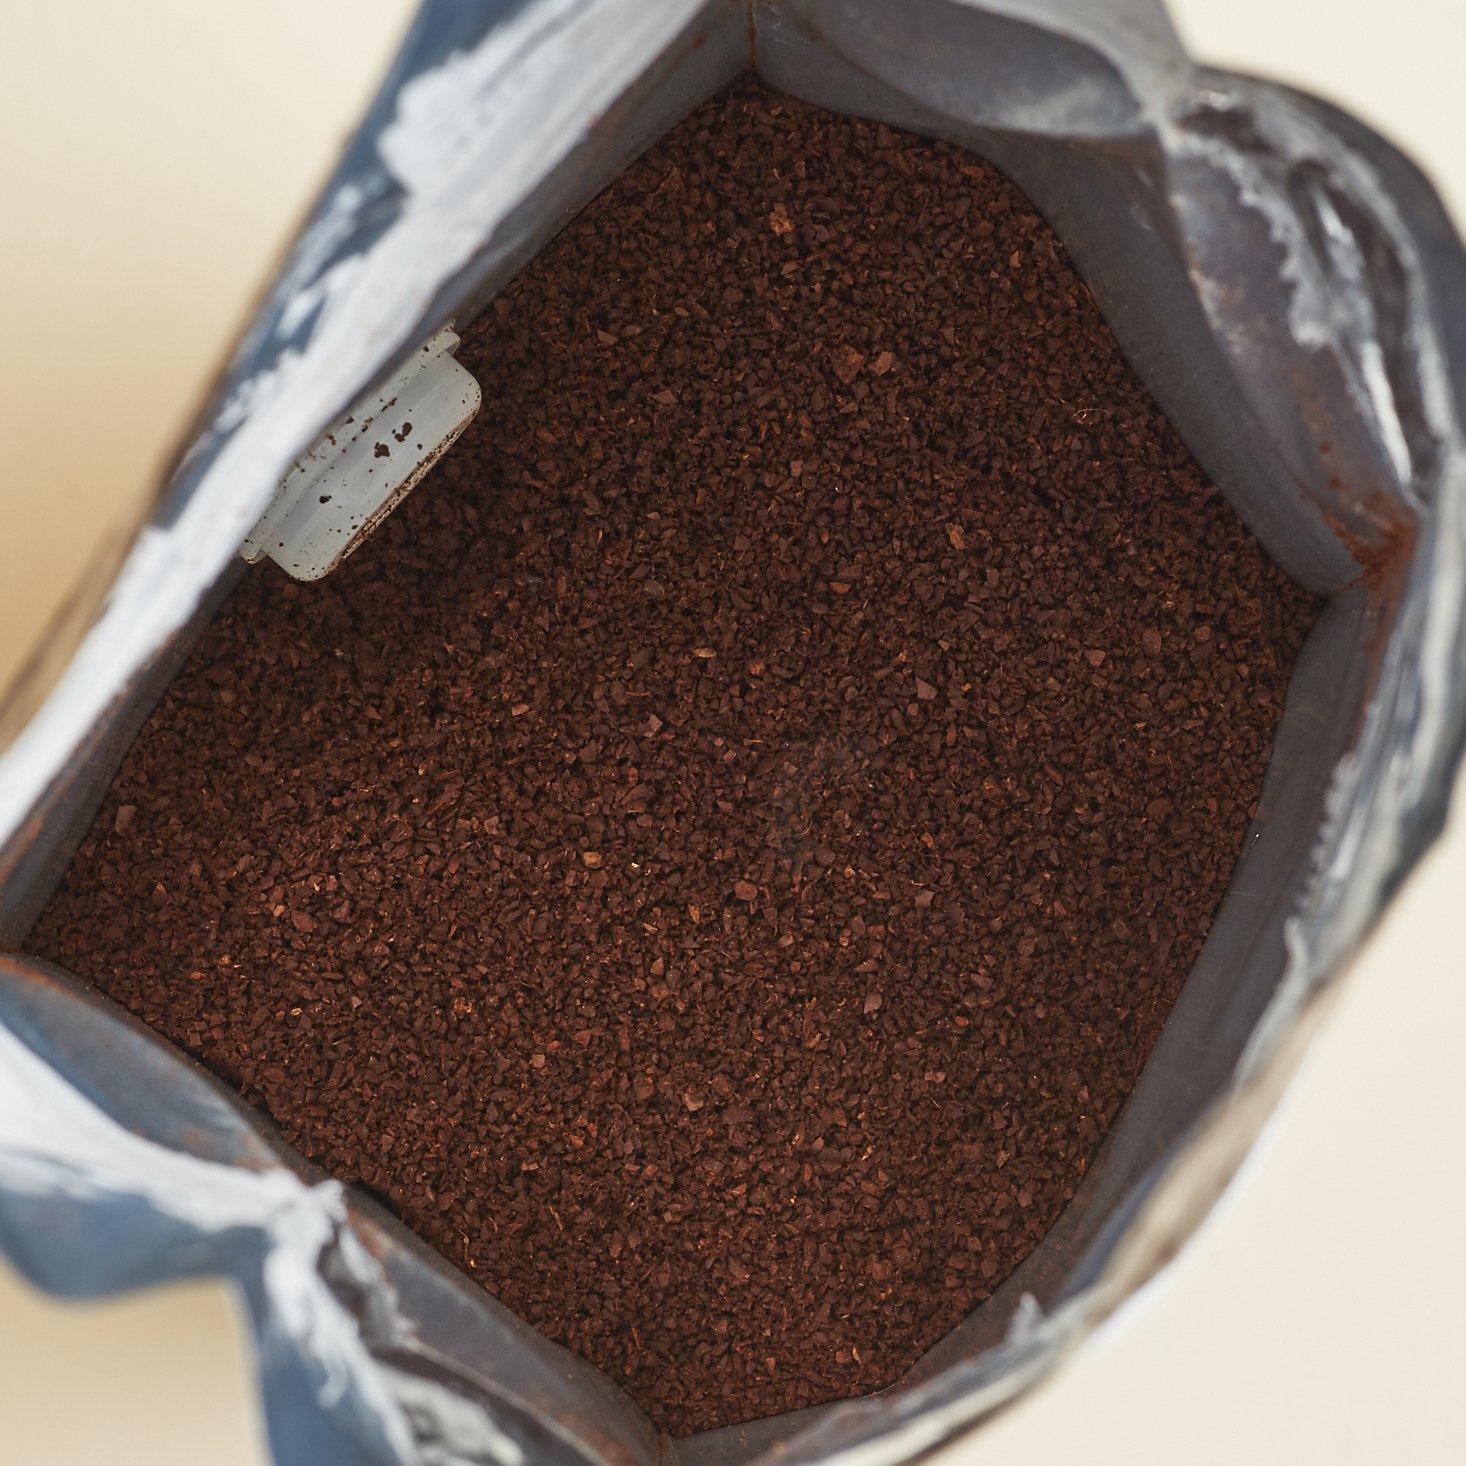 inside coffee bag, showing ground size